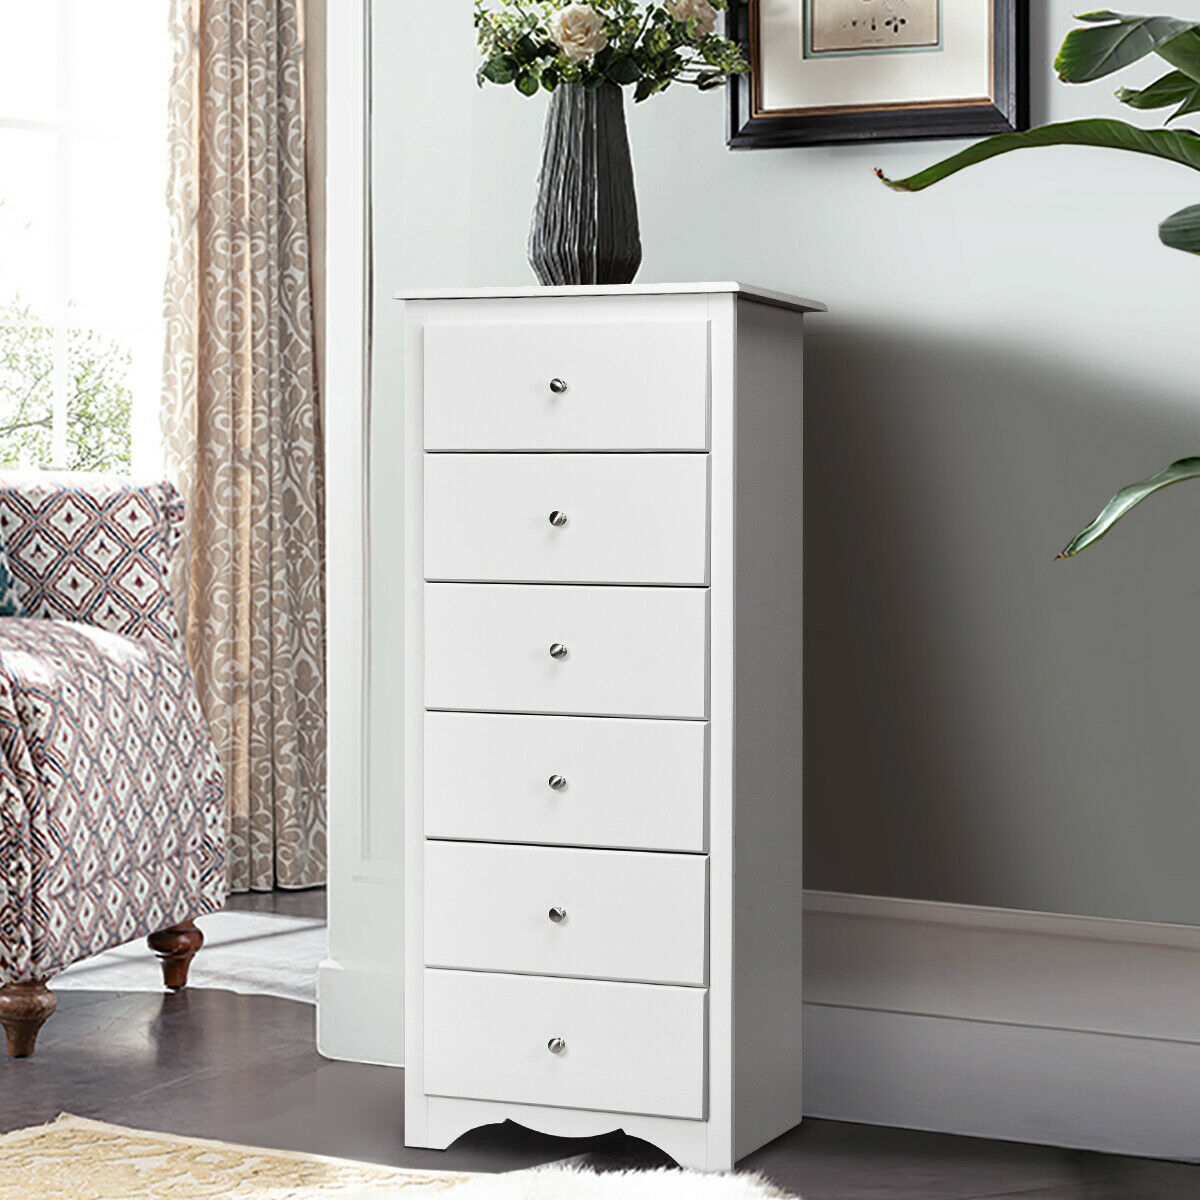 6 Drawer Chest Dresser Clothes Storage Bedroom Tall Furniture Cabinet White